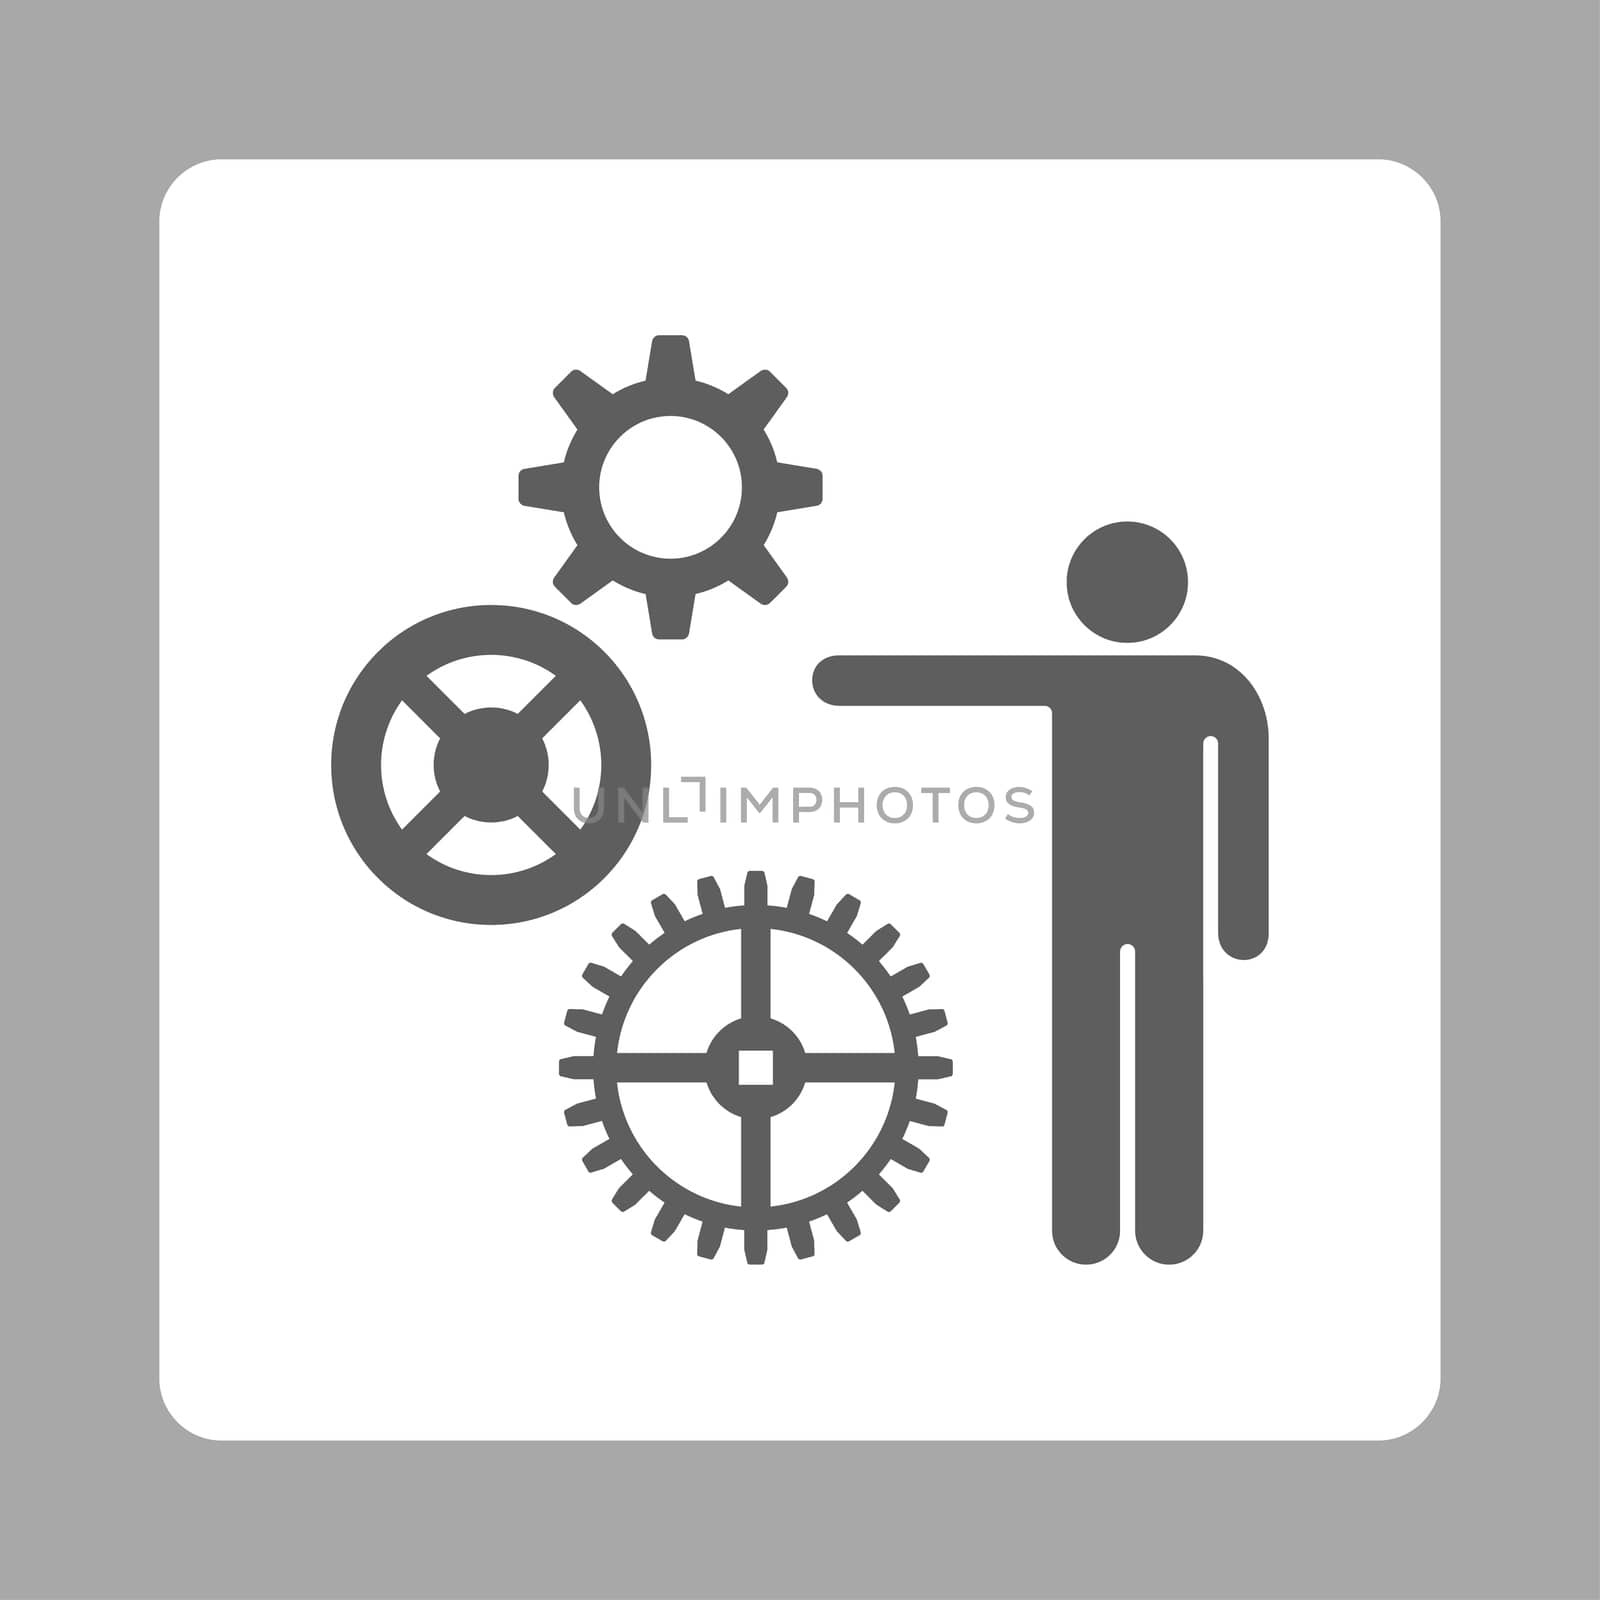 Project icon. Glyph style is dark gray and white colors, flat square rounded button, silver background.